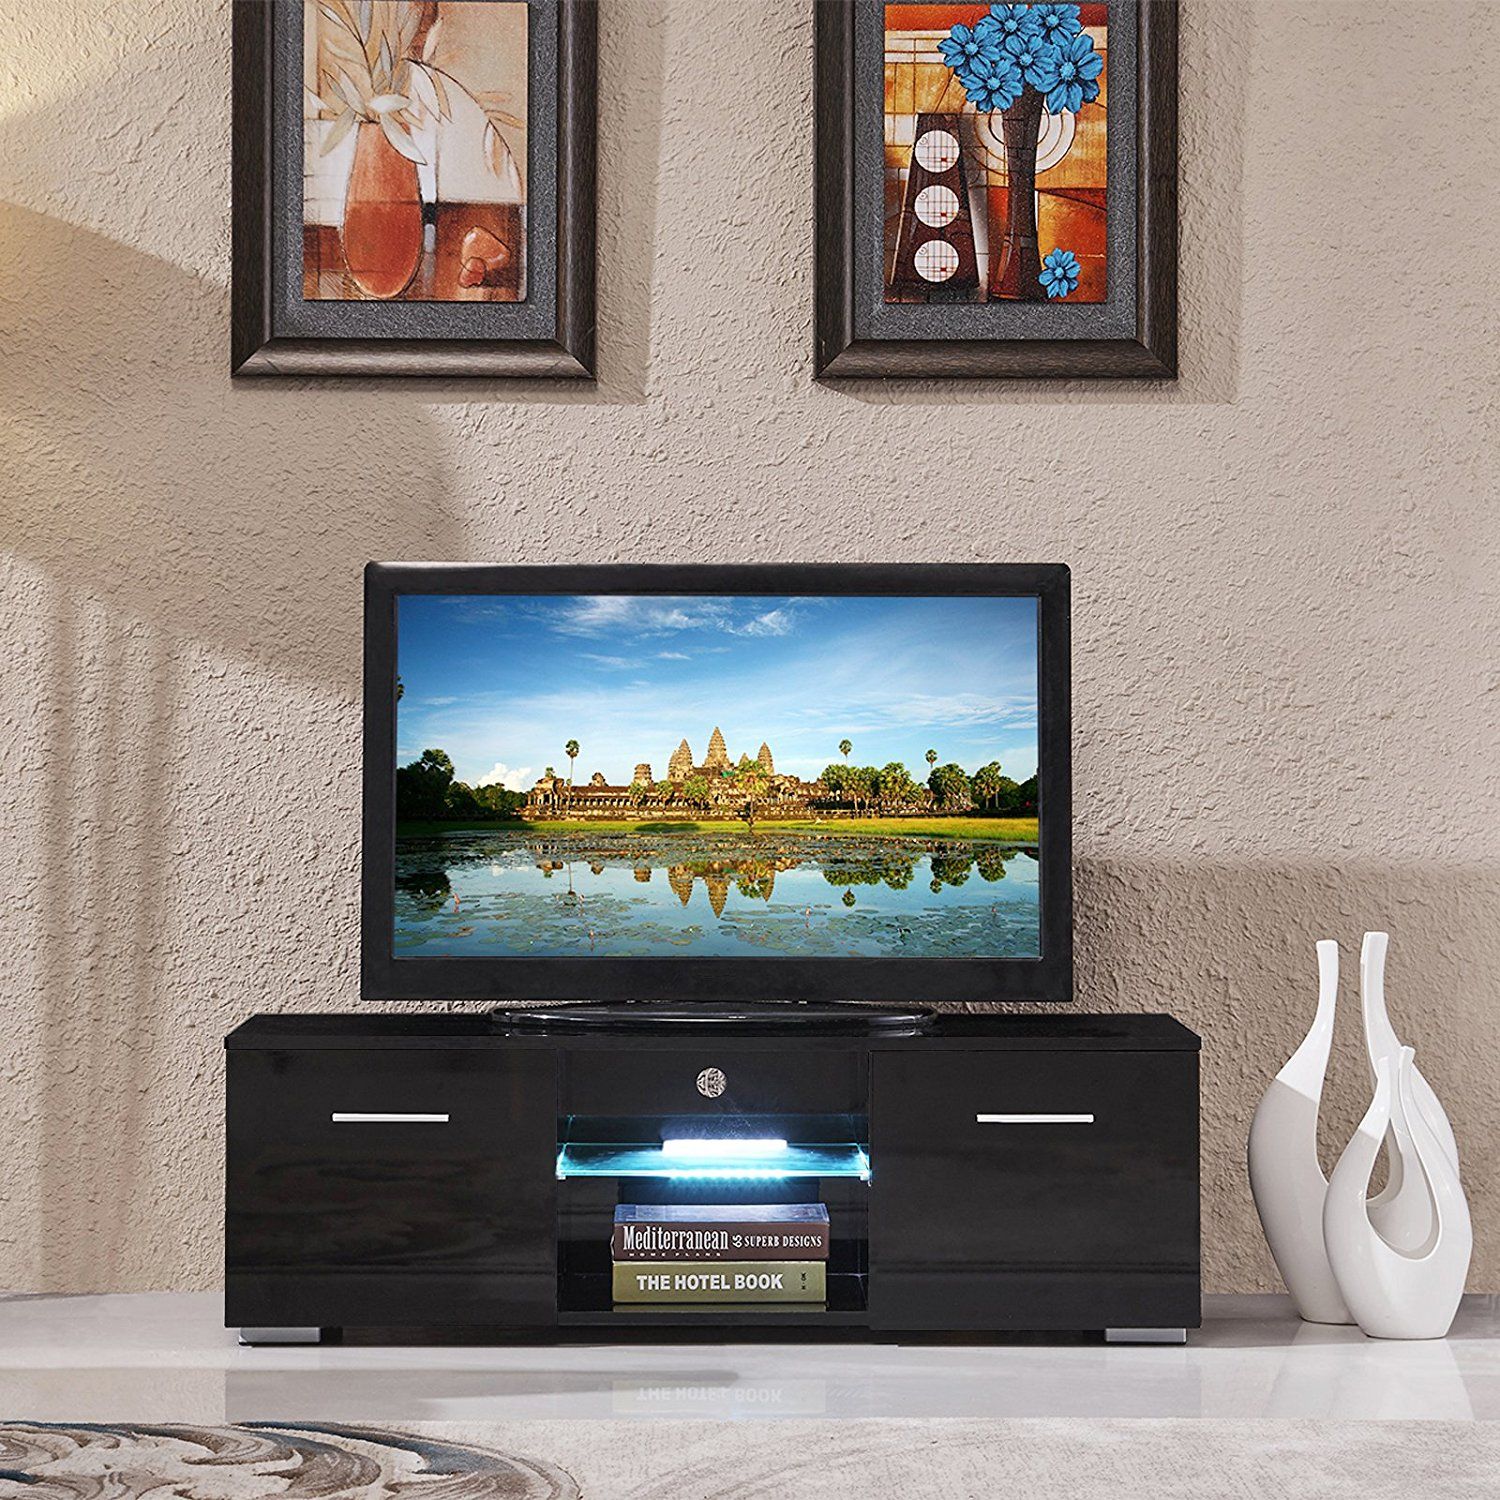 Mecor Tv Stand High Gloss Media Console Cabinet Led Intended For Stand And Deliver Tv Stands (View 3 of 15)